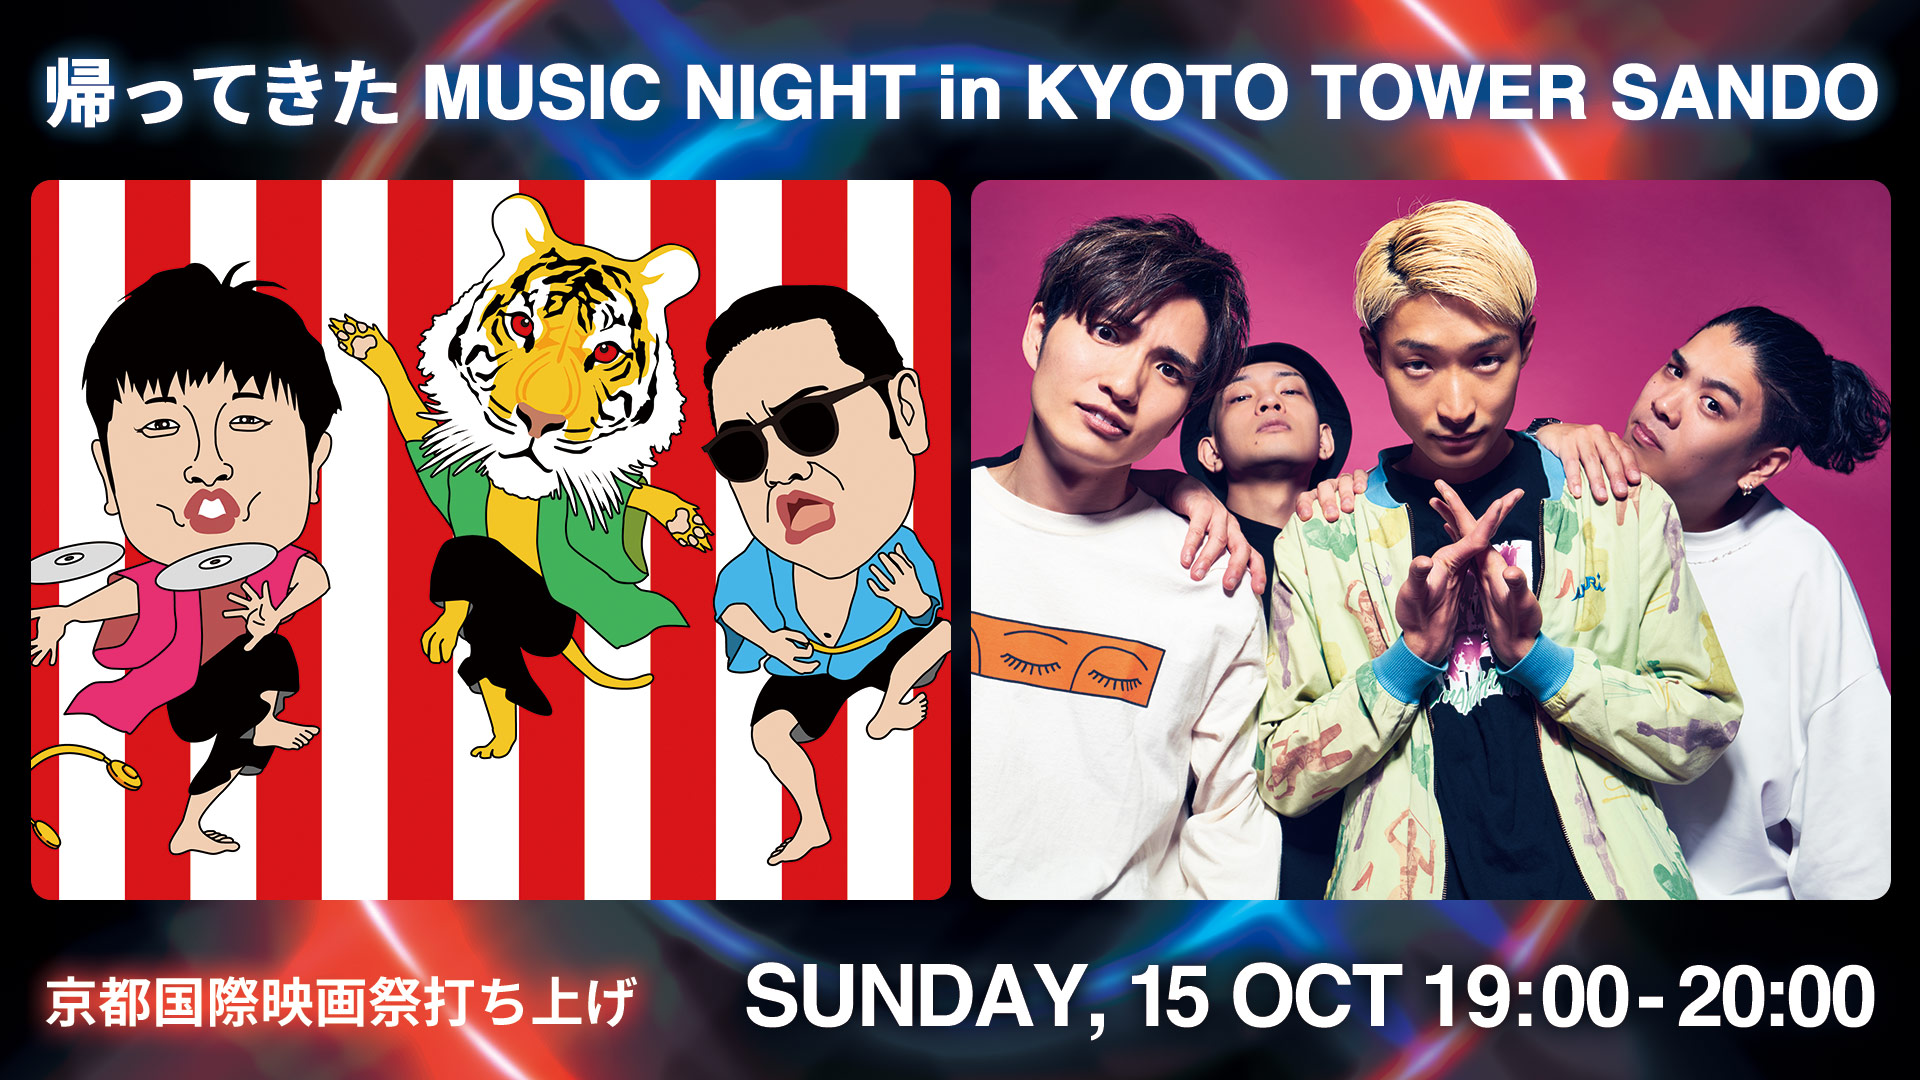 Kyoto Tower Sando x Kyoto International Film and Art Festival 2023 Collaboration Event - Return of MUSIC NIGHT in KYOTO TOWER SANDO at the launch of the Kyoto International Film and Art Festival